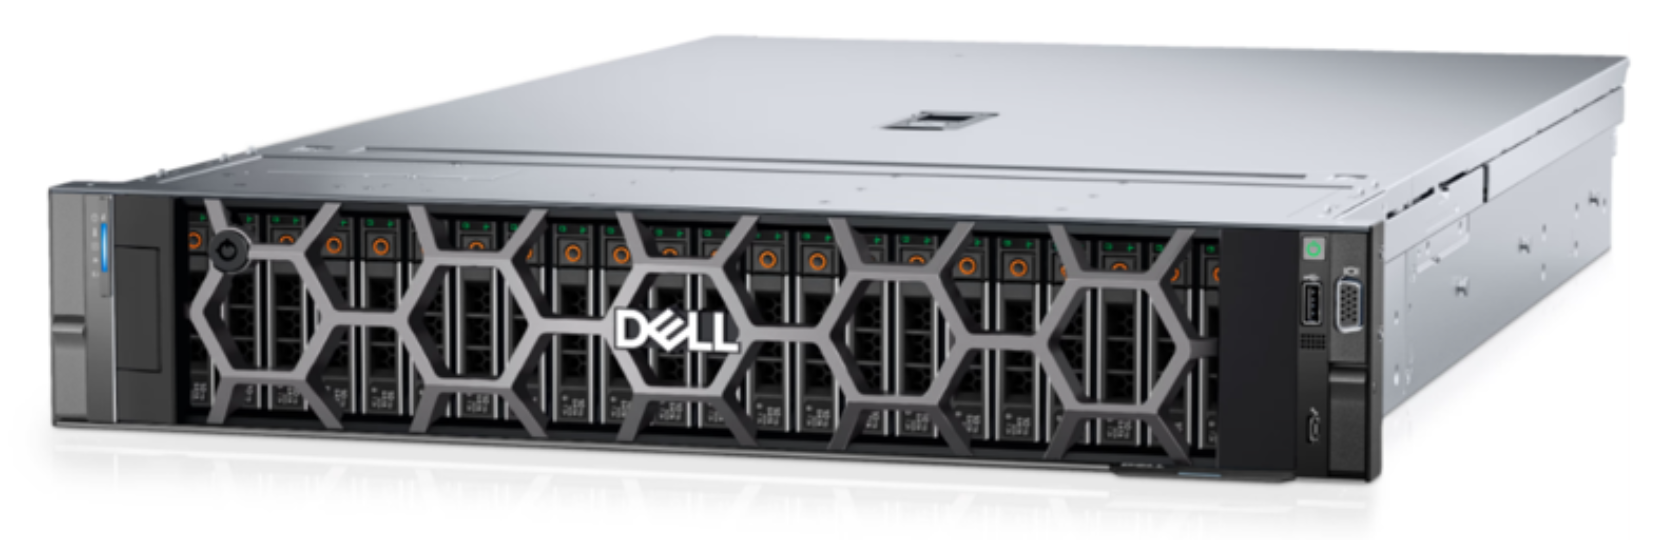 This figure shows the PowerEdge R760 Rack Server, which providesUltimate performance and versatility.The 2U, 2 socket Dell PowerEdge R760 enables faster time to value with peak compute performance, through optimum configurations.